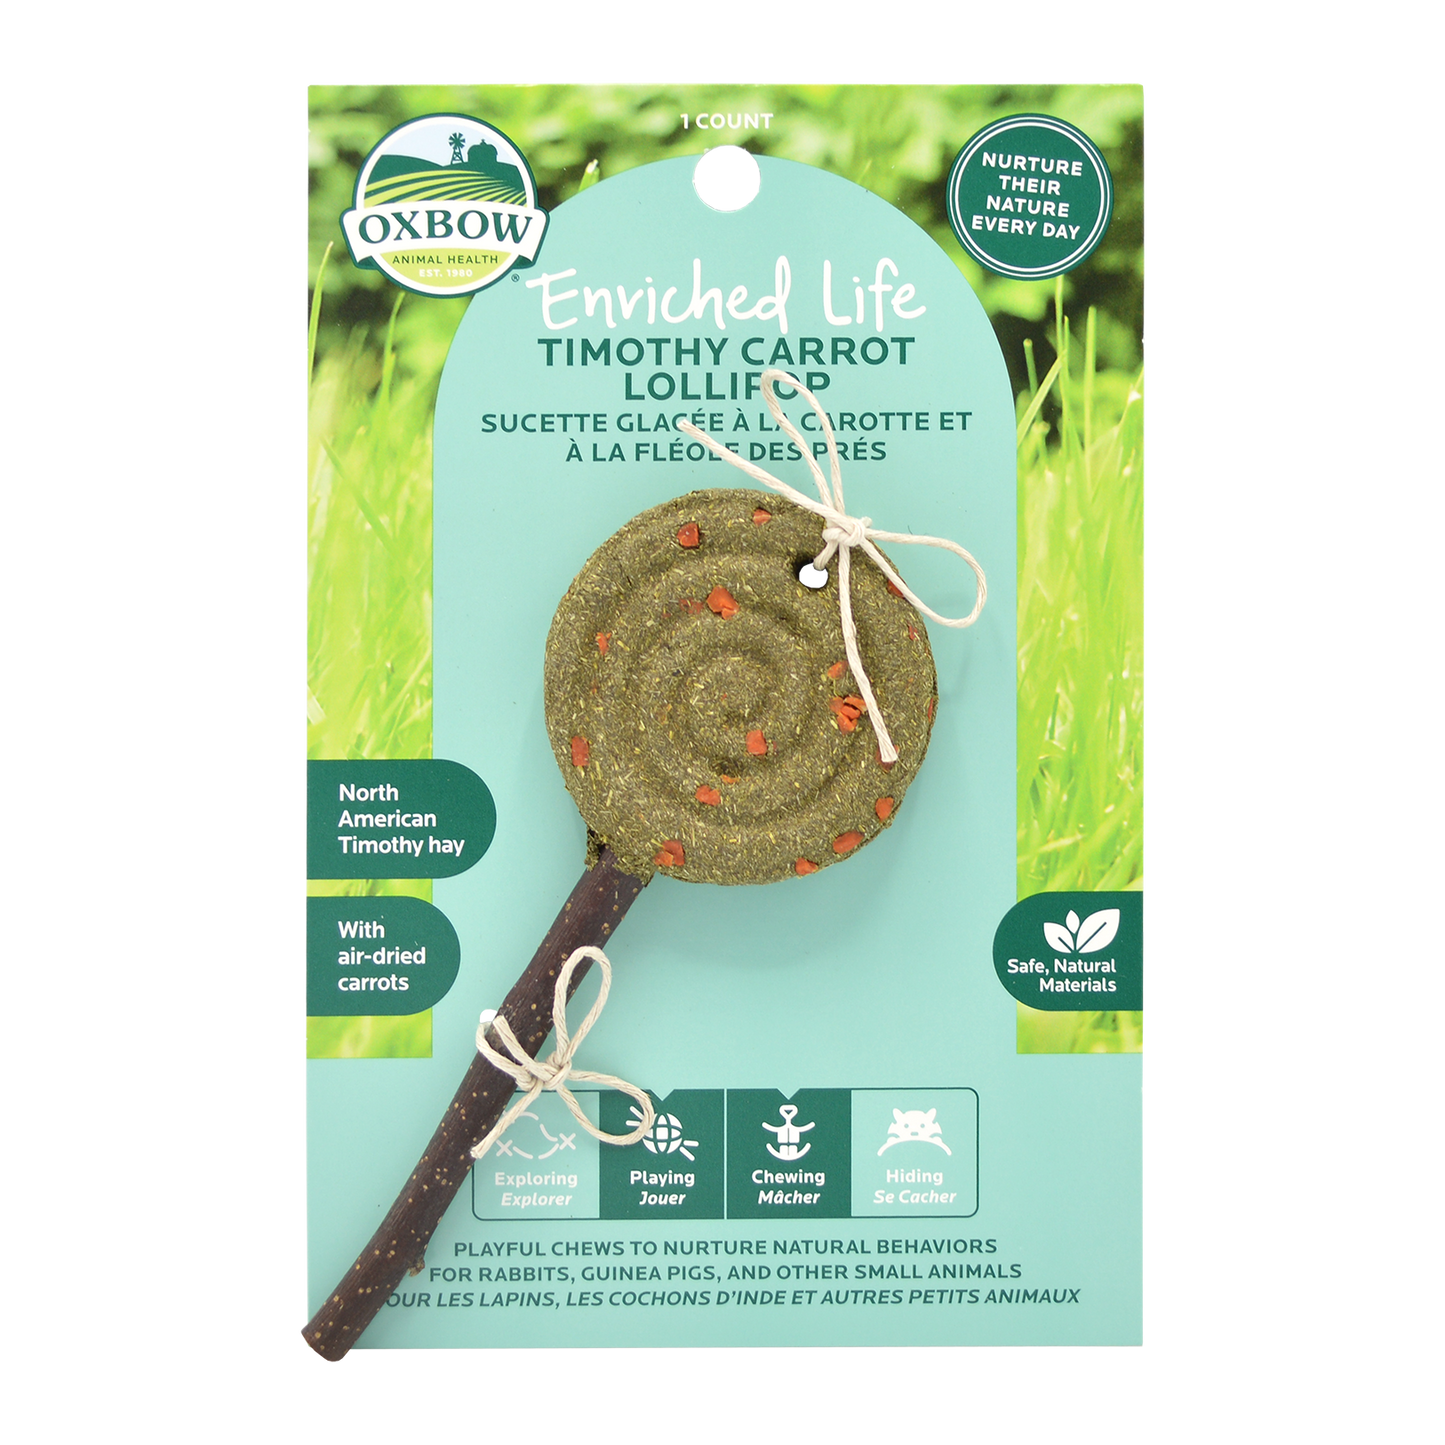 Oxbow® Enriched Life - Timothy Carrot Lollipop